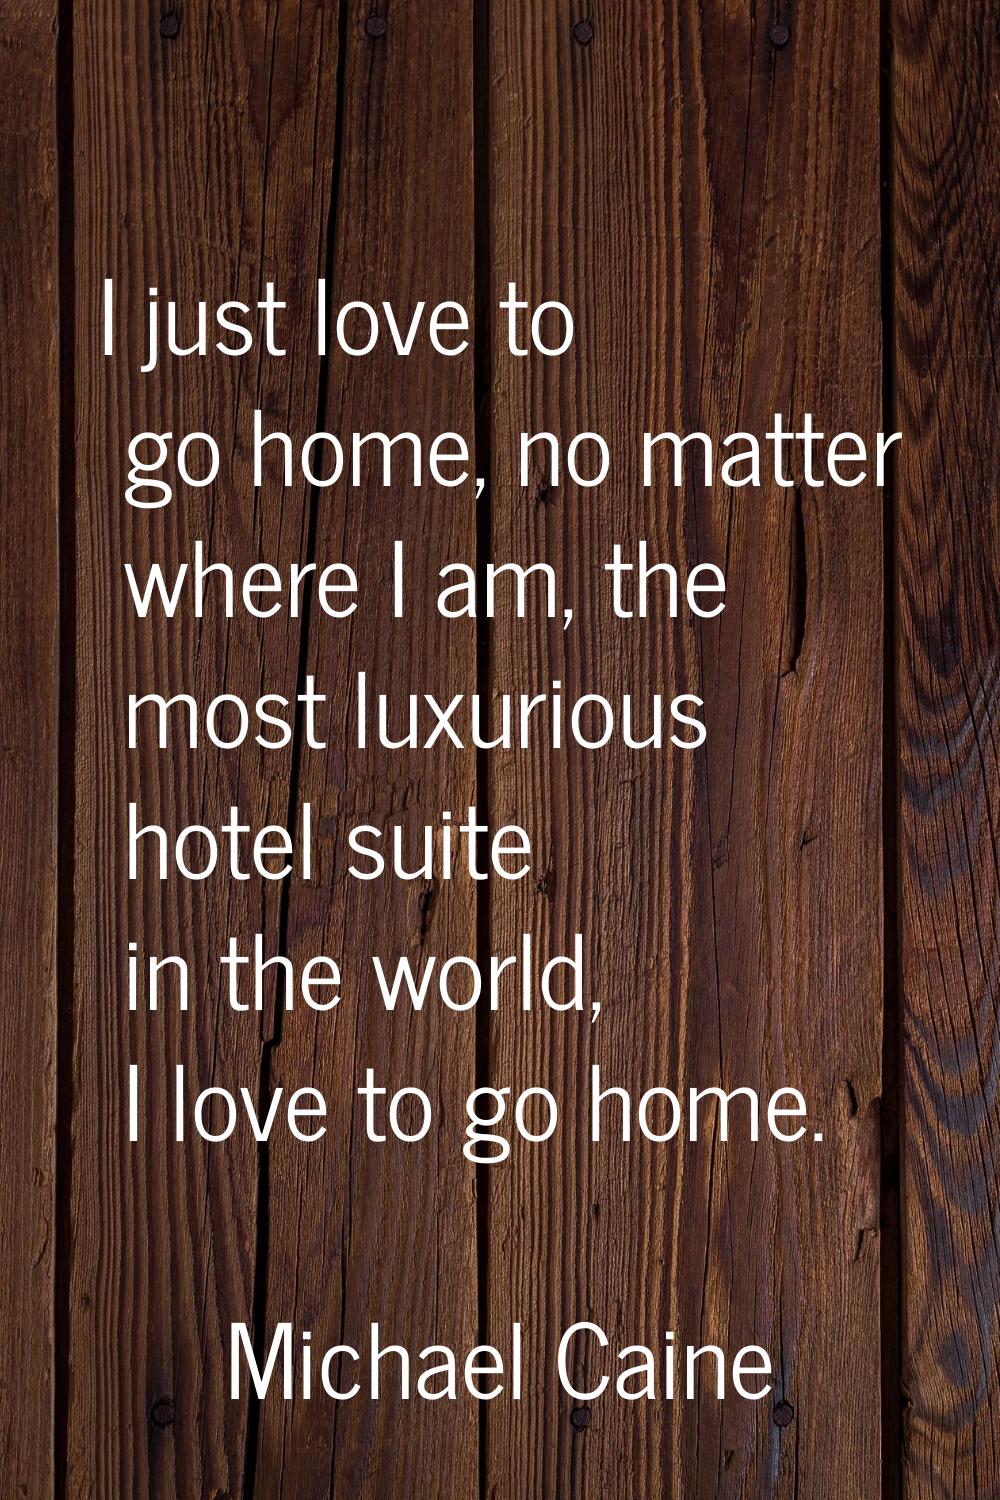 I just love to go home, no matter where I am, the most luxurious hotel suite in the world, I love t